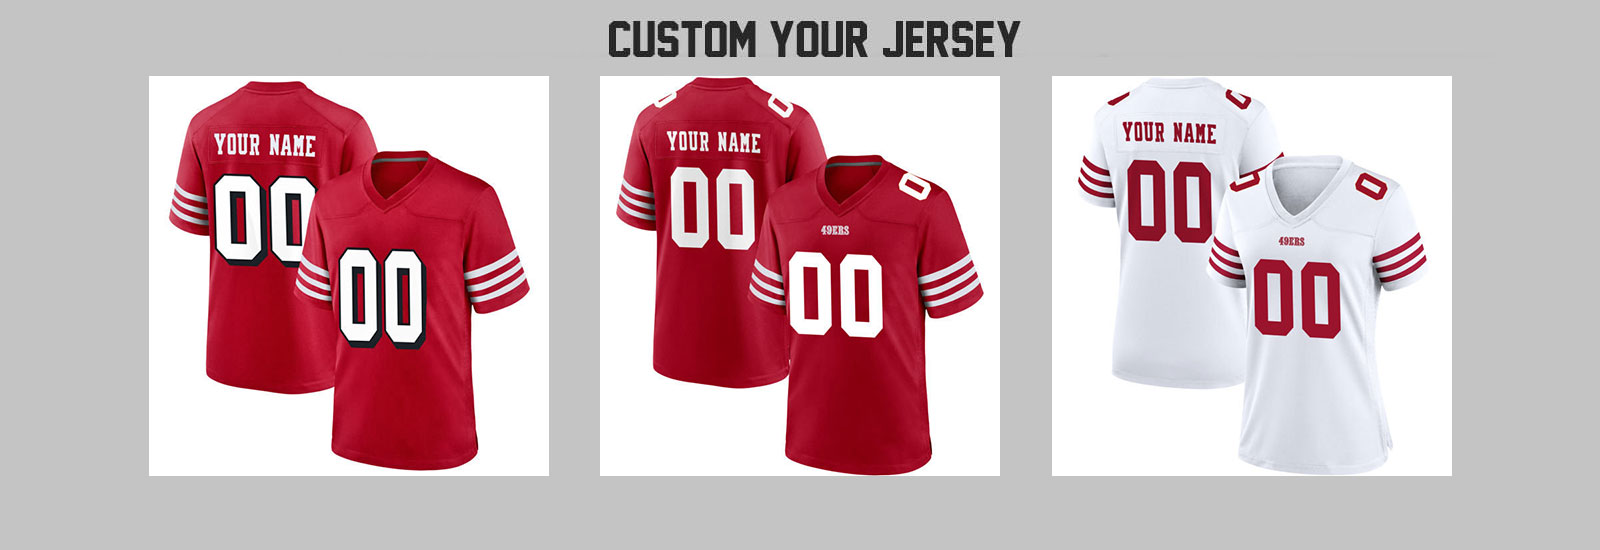 49ers customized jersey